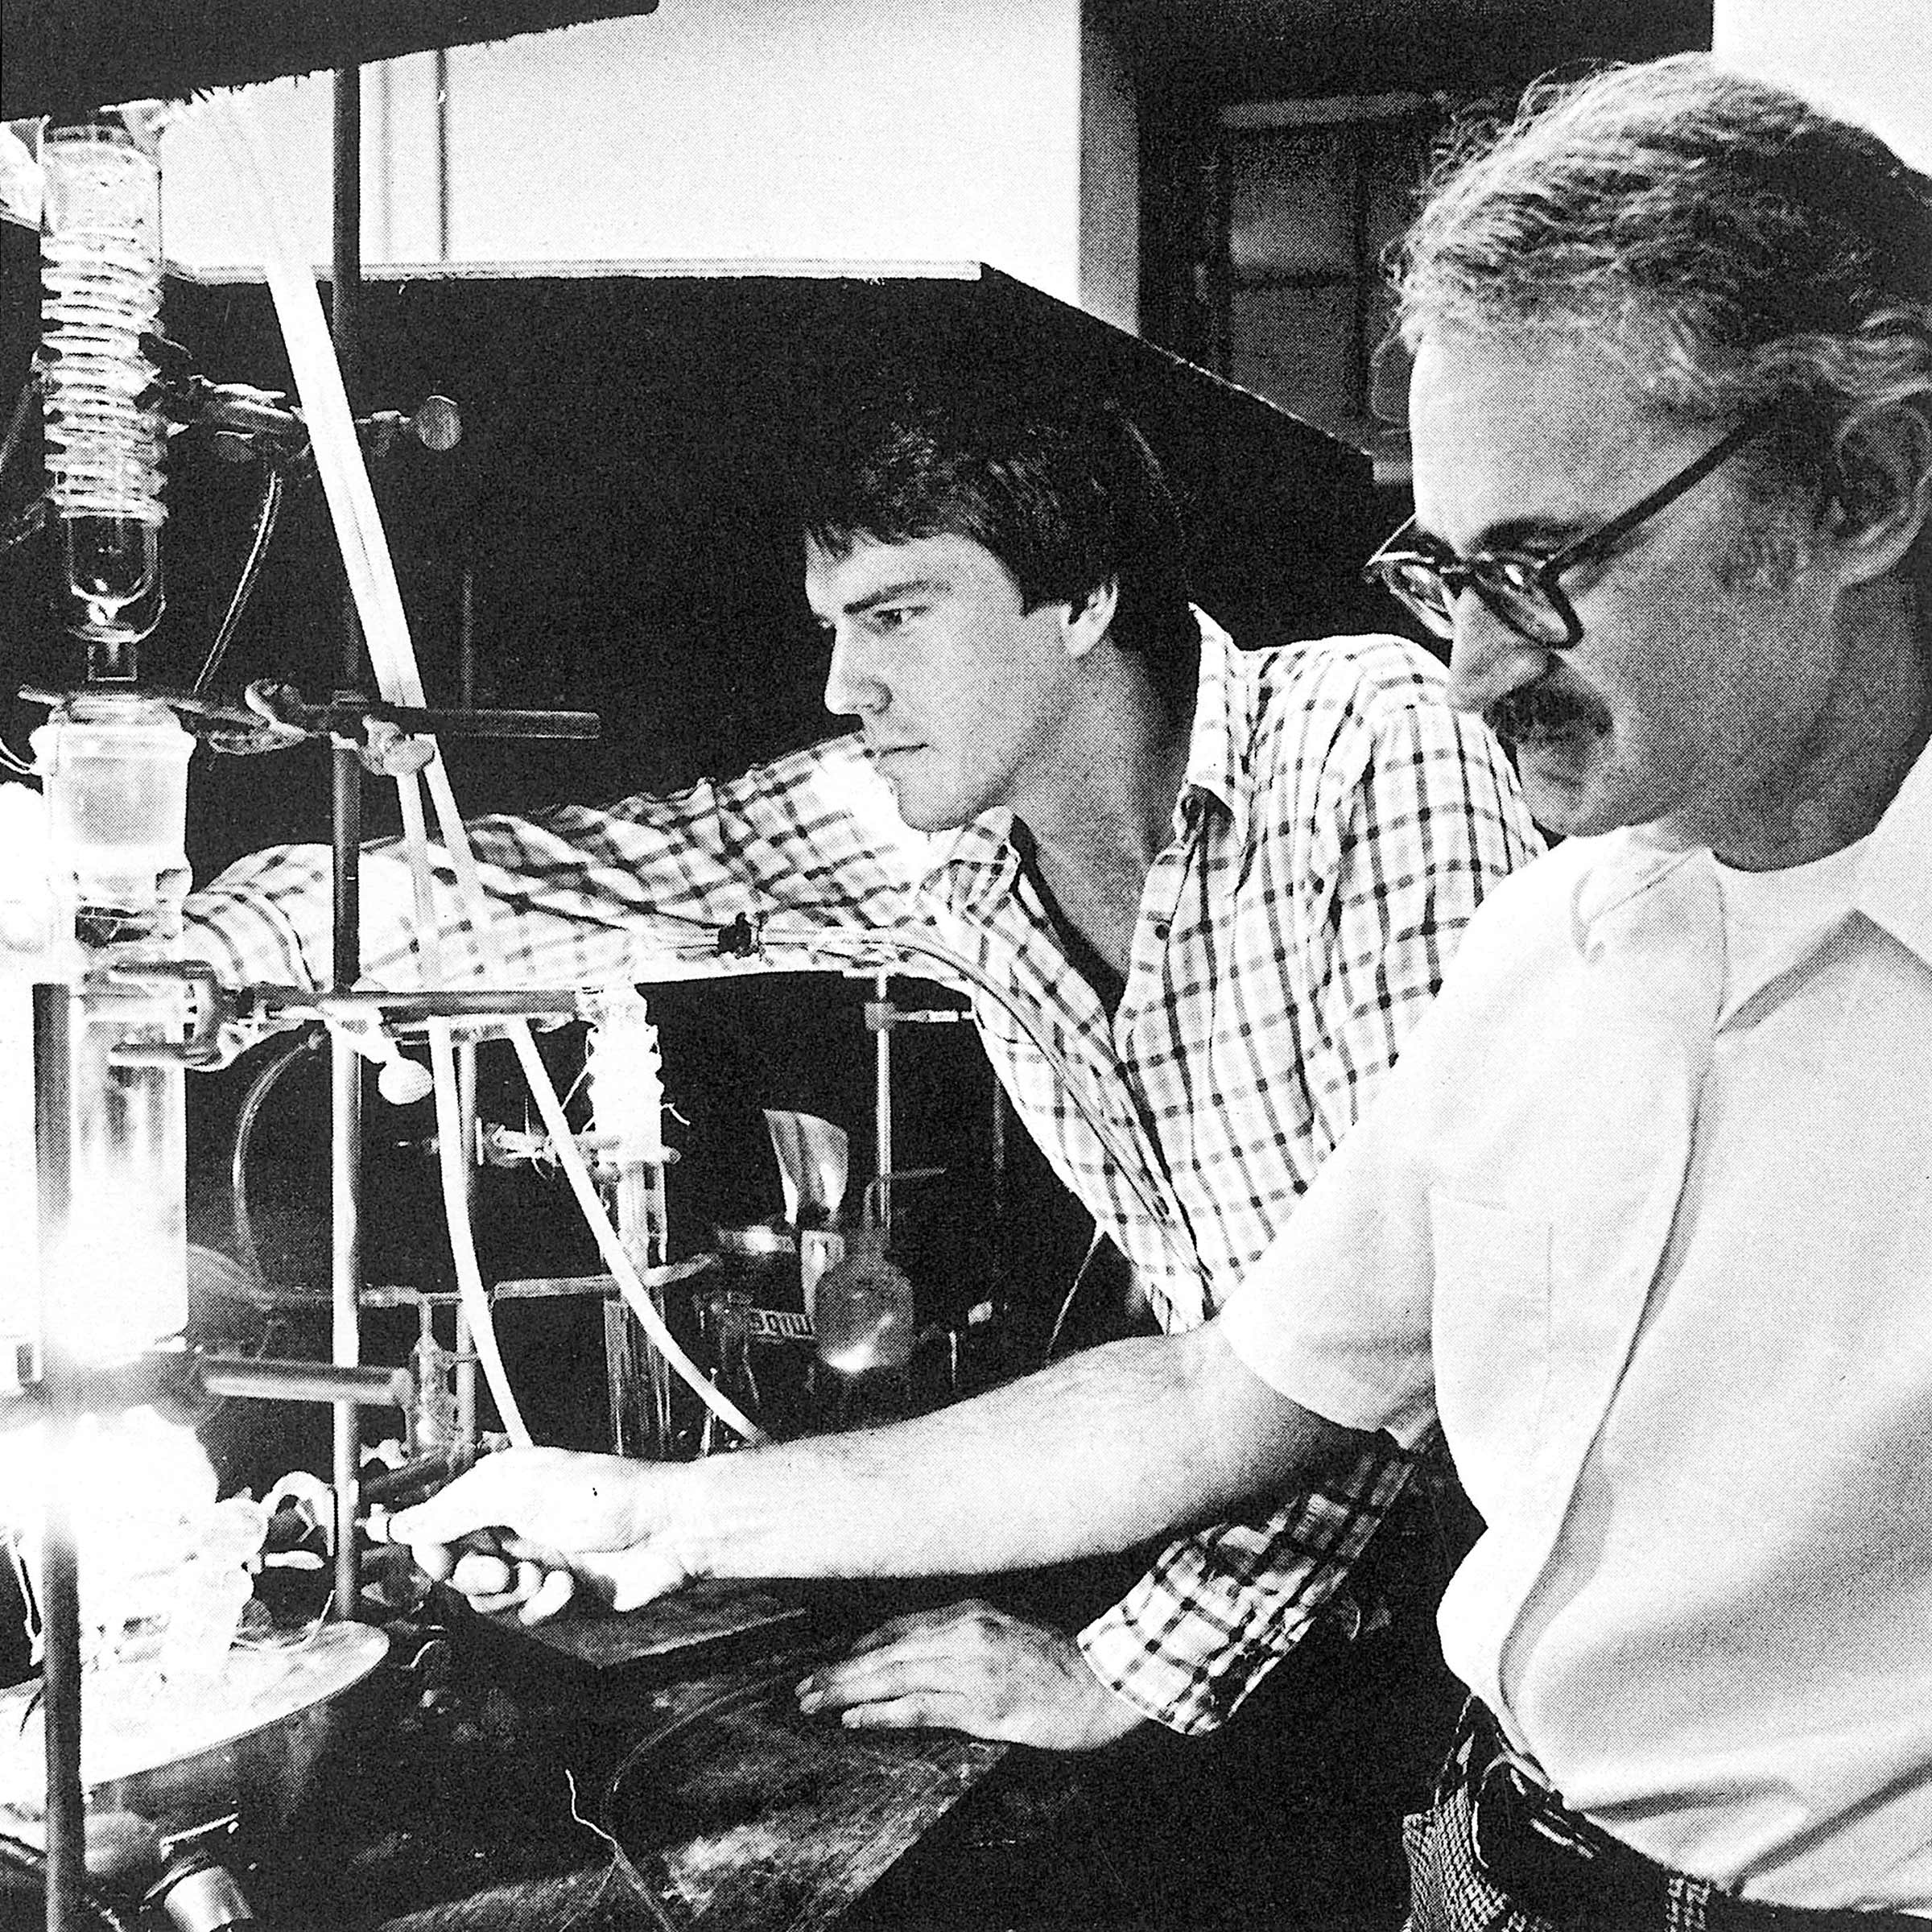 Bard and Wendell Dunn in lab in late 70s from book by Margaret Berry